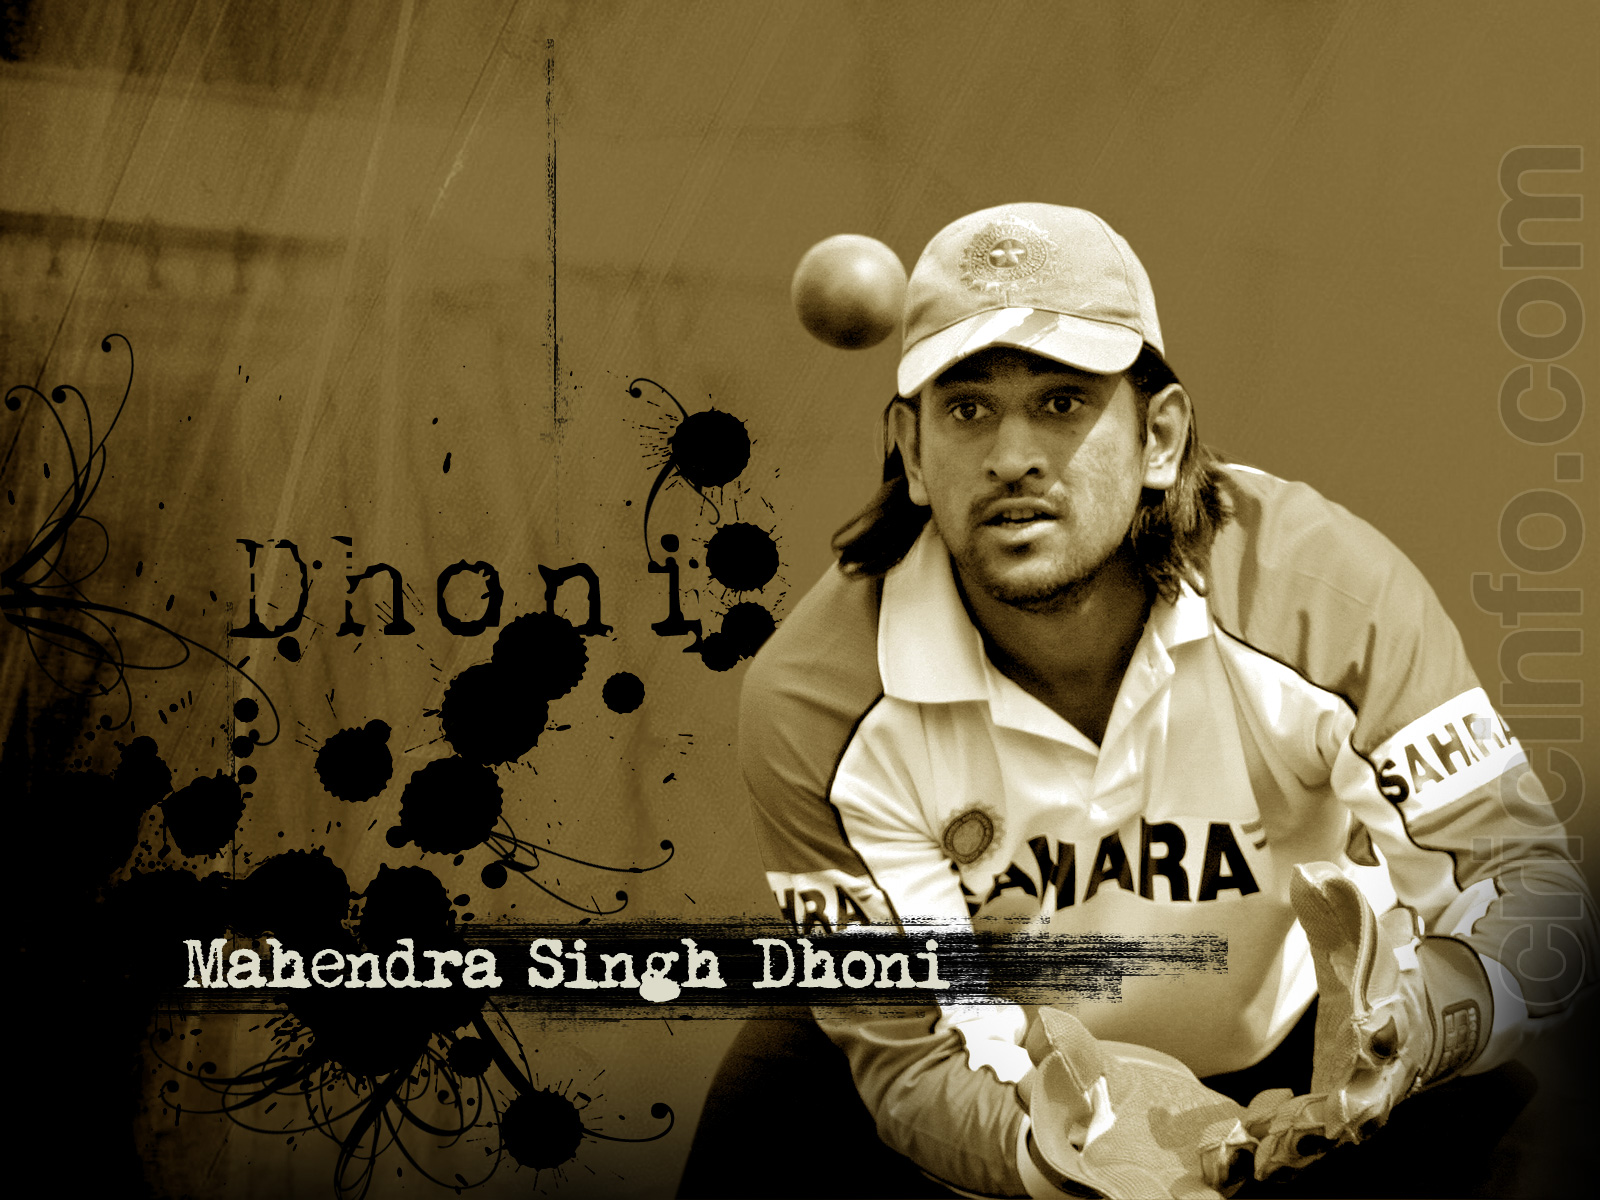 Home of sports: MS Dhoni